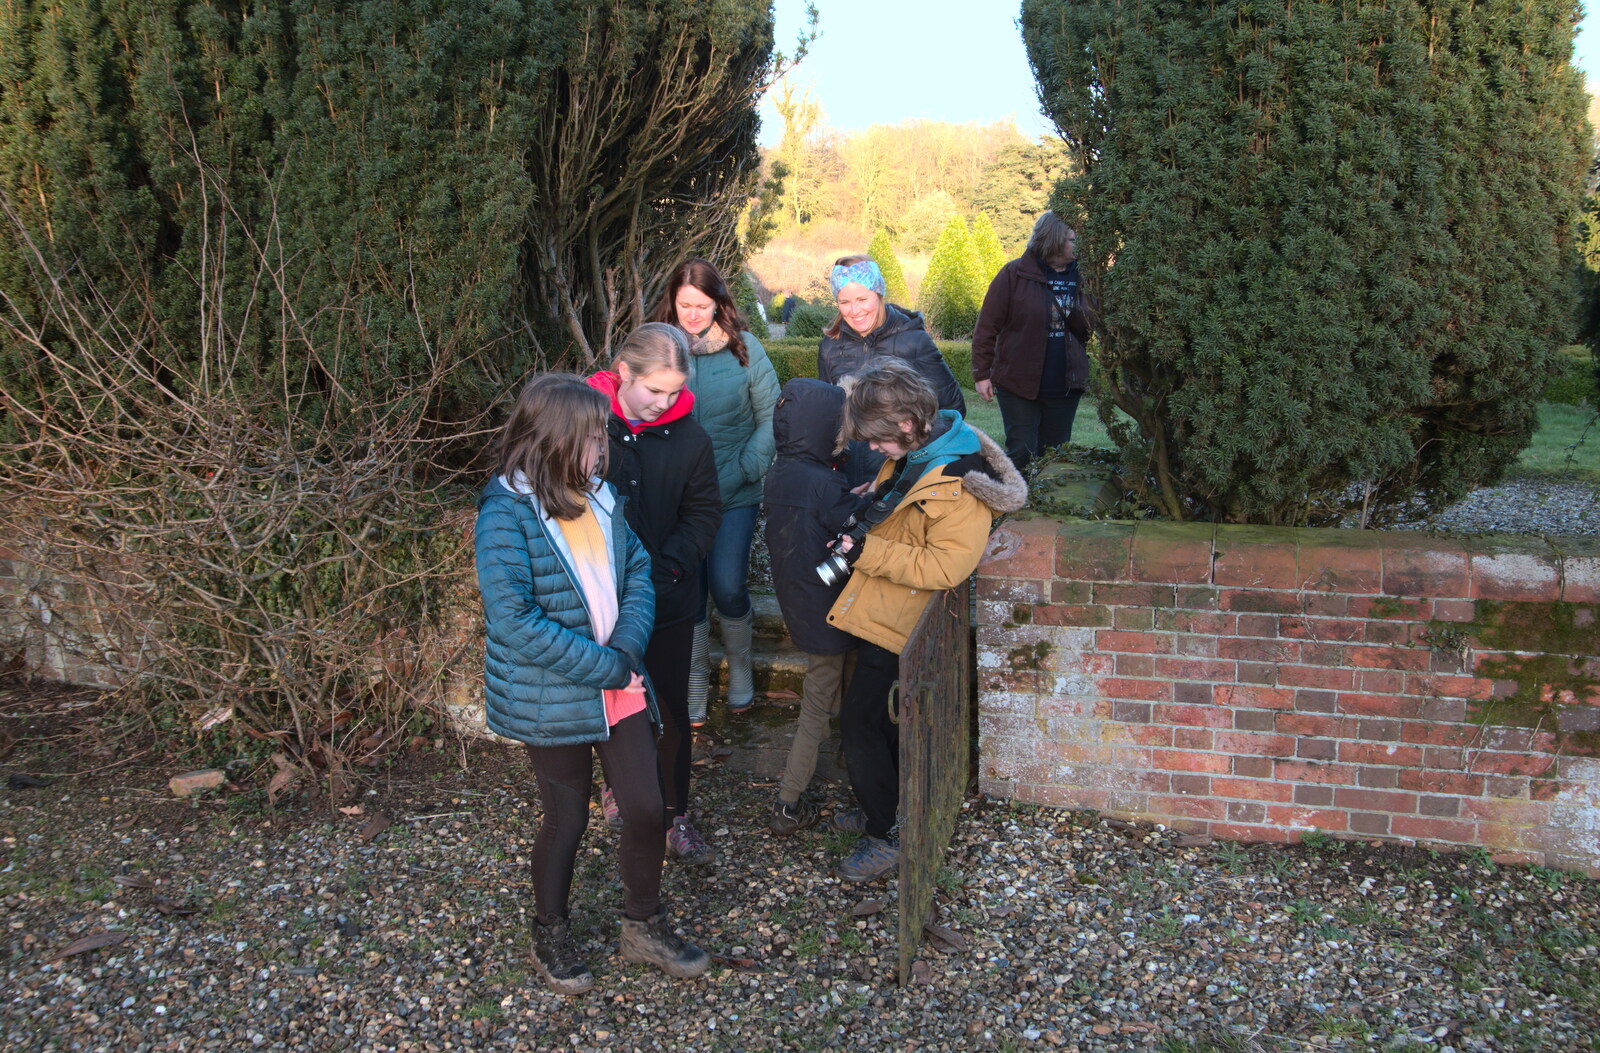 The gang leave the hall from Snowdrops at Talconeston Hall, Tacolneston, Norfolk - 7th February 2020